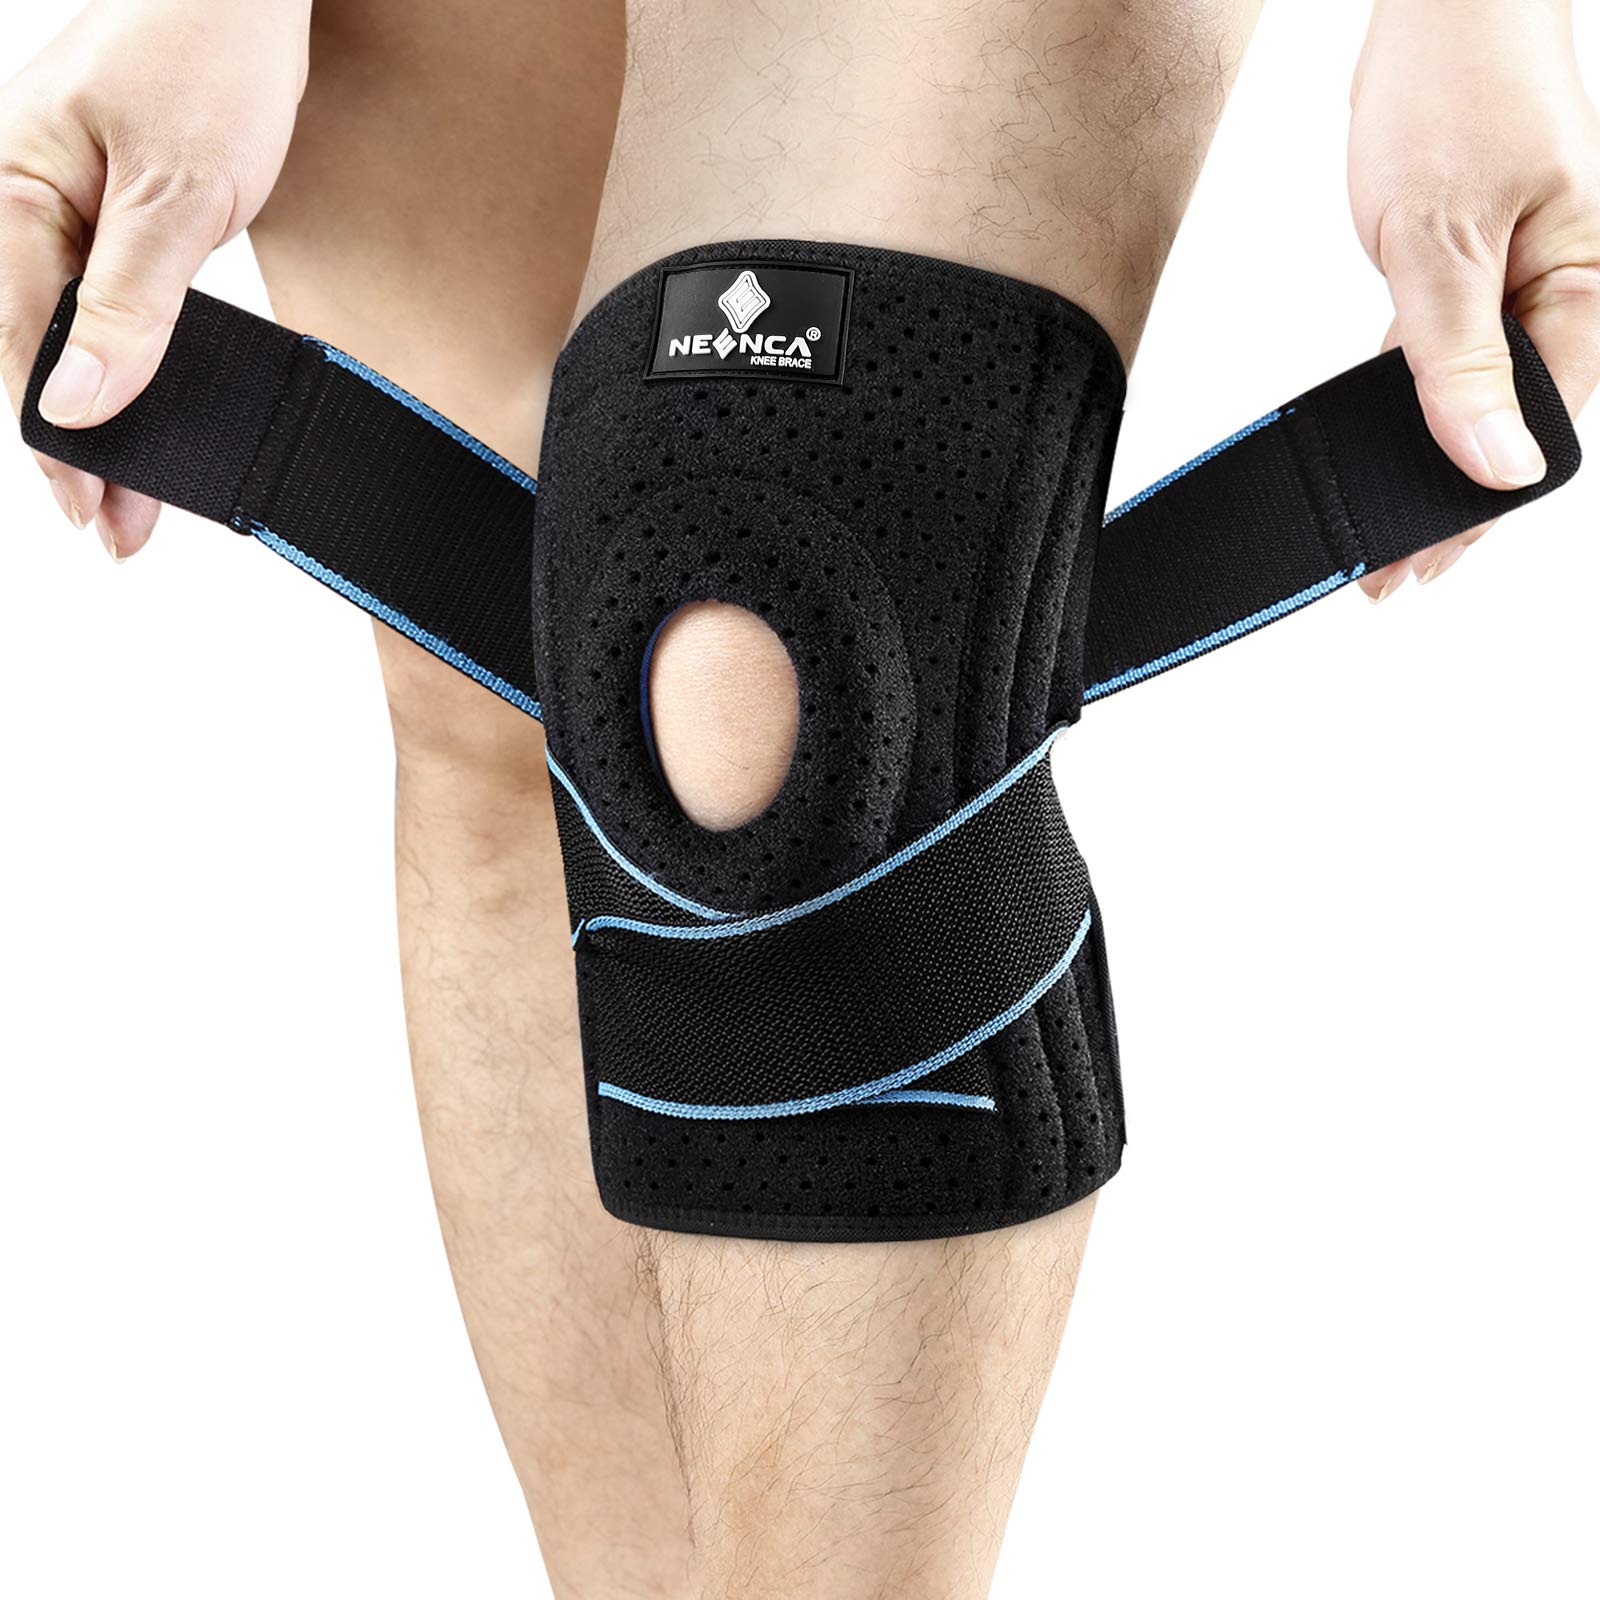 NEENCA Knee Brace with Side Stabilizers & Patella Gel Pads, Adjustable  Compression Knee Support Braces for Knee Pain, Meniscus  Tear,ACL,MCL,Arthritis, Joint Pain Relief,Injury Recovery-4 Sizes. AC-54  Large